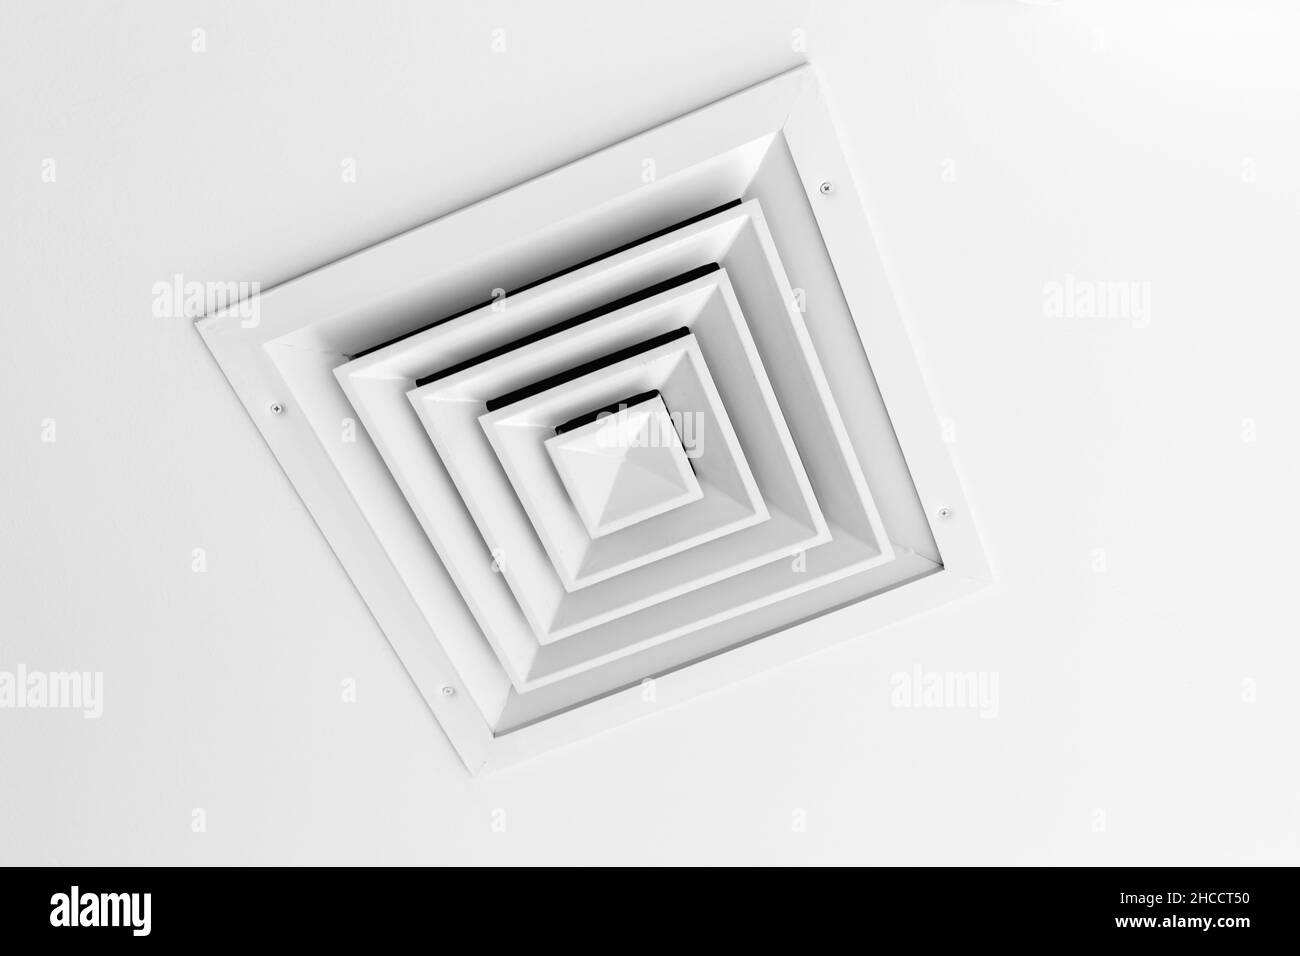 https://c8.alamy.com/comp/2HCCT50/white-ceiling-ventilation-grille-with-square-diffusors-close-up-photo-2HCCT50.jpg